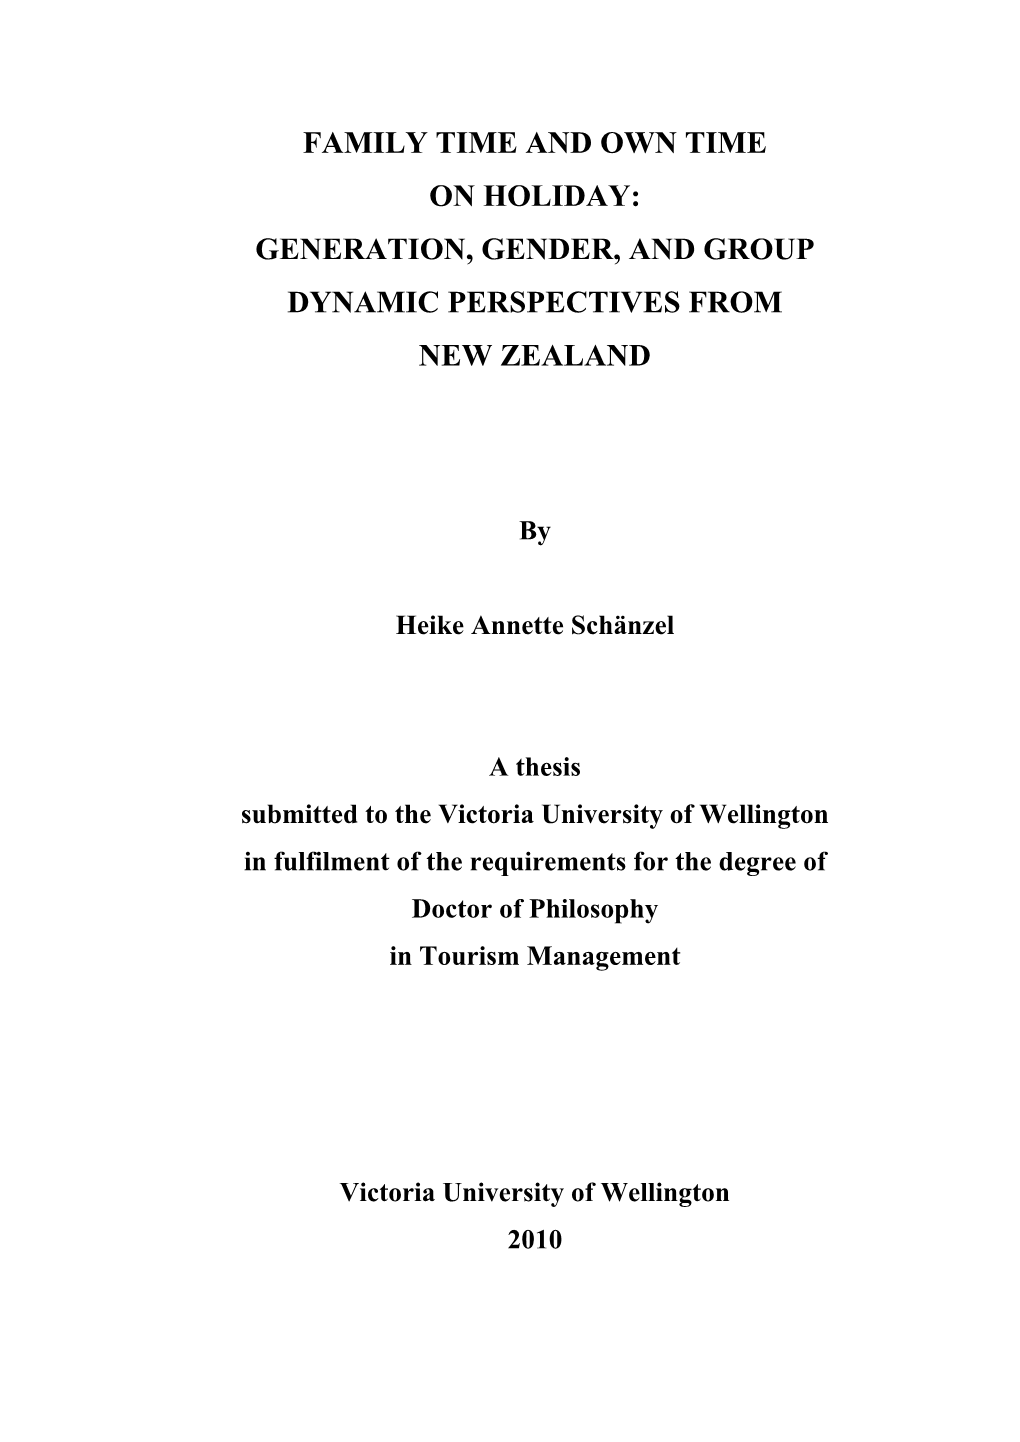 Family Time and Own Time on Holiday: Generation, Gender, and Group Dynamic Perspectives from New Zealand